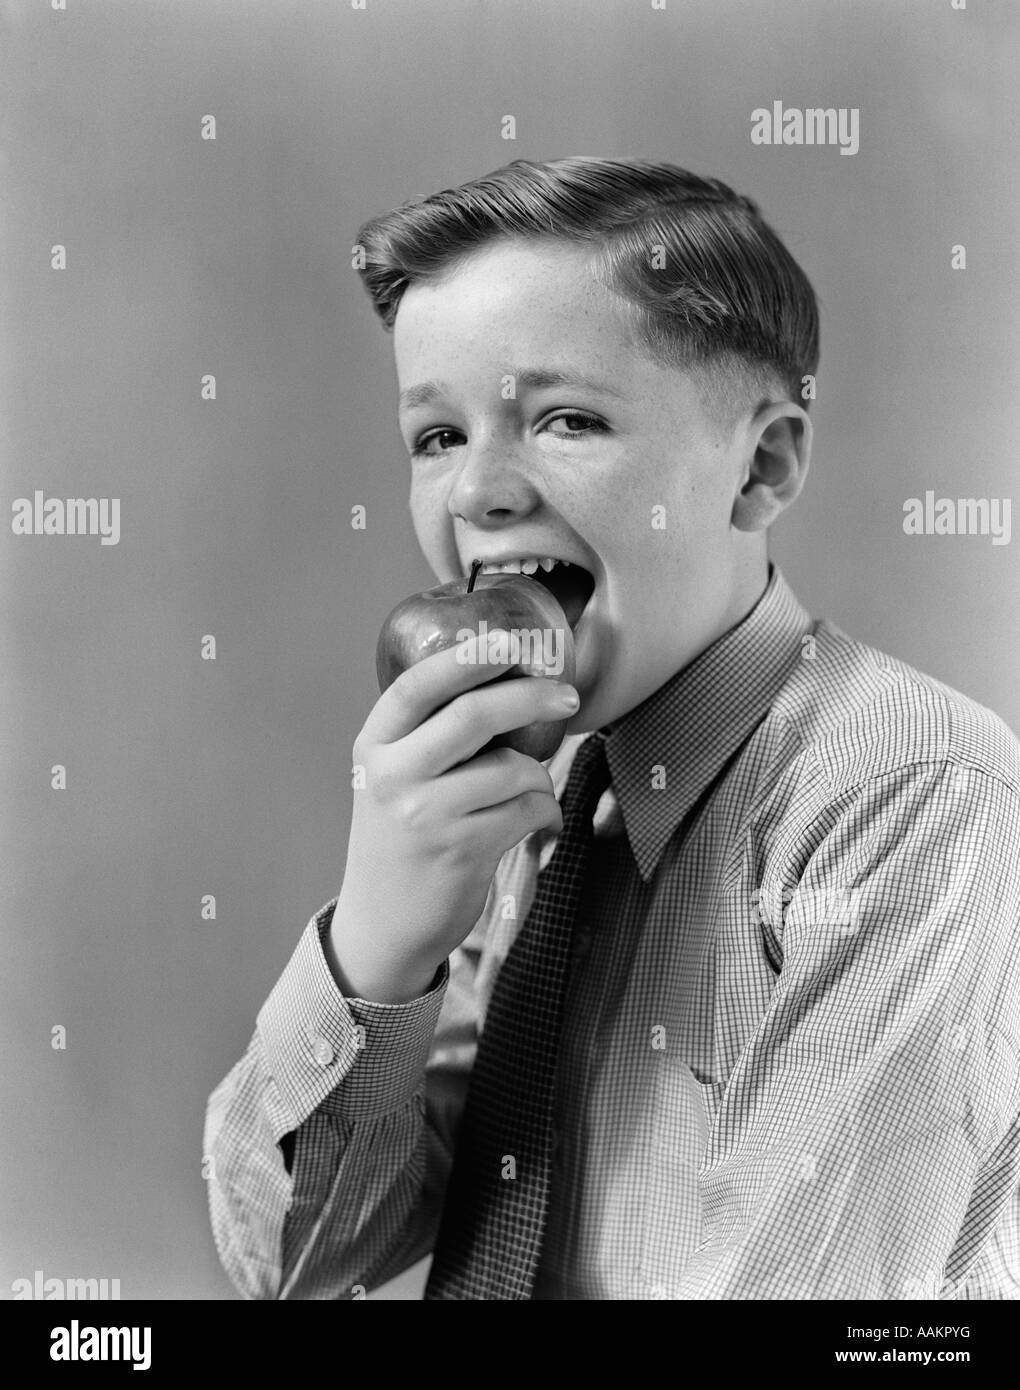 1940s BOY EATING BITING INTO APPLE LOOKING AT CAMERA Stock Photo